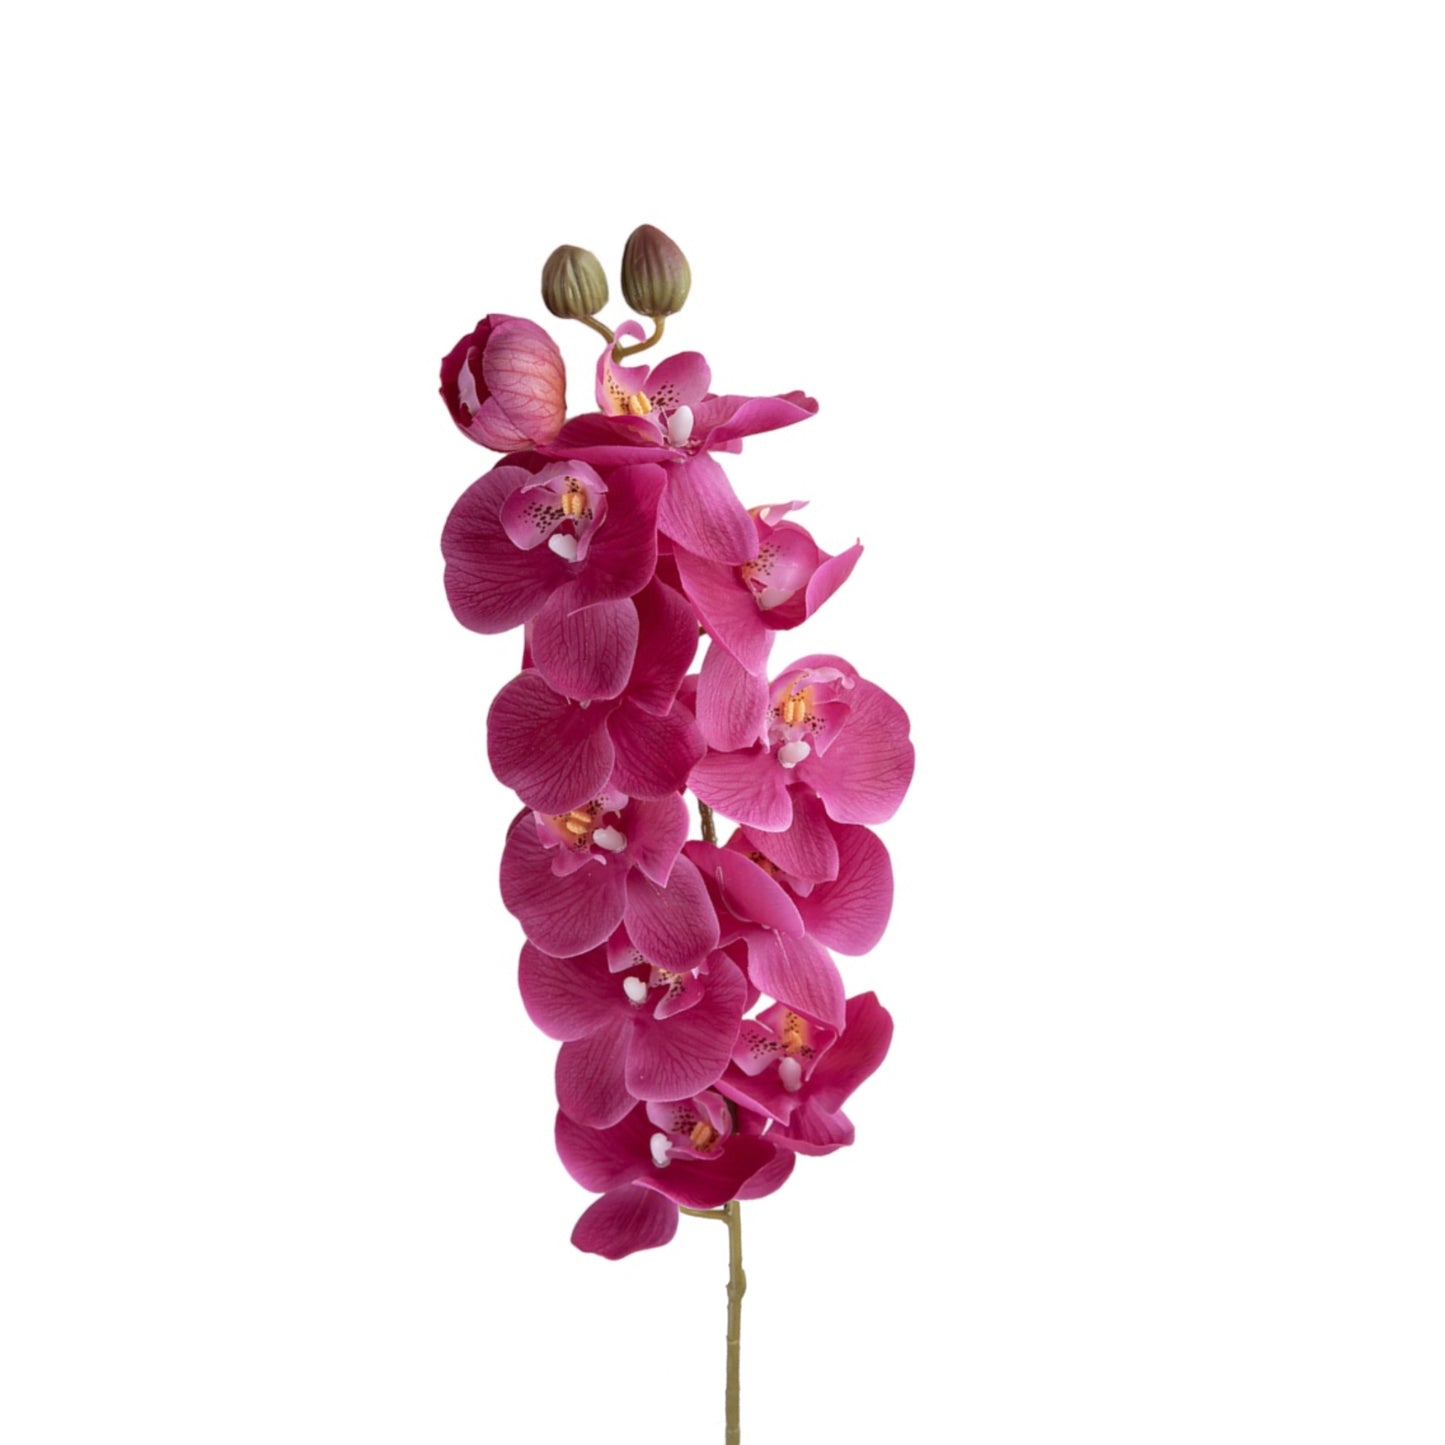 Set of 2 Artificial Phalaenopsis Orchid Stems, 28 inches